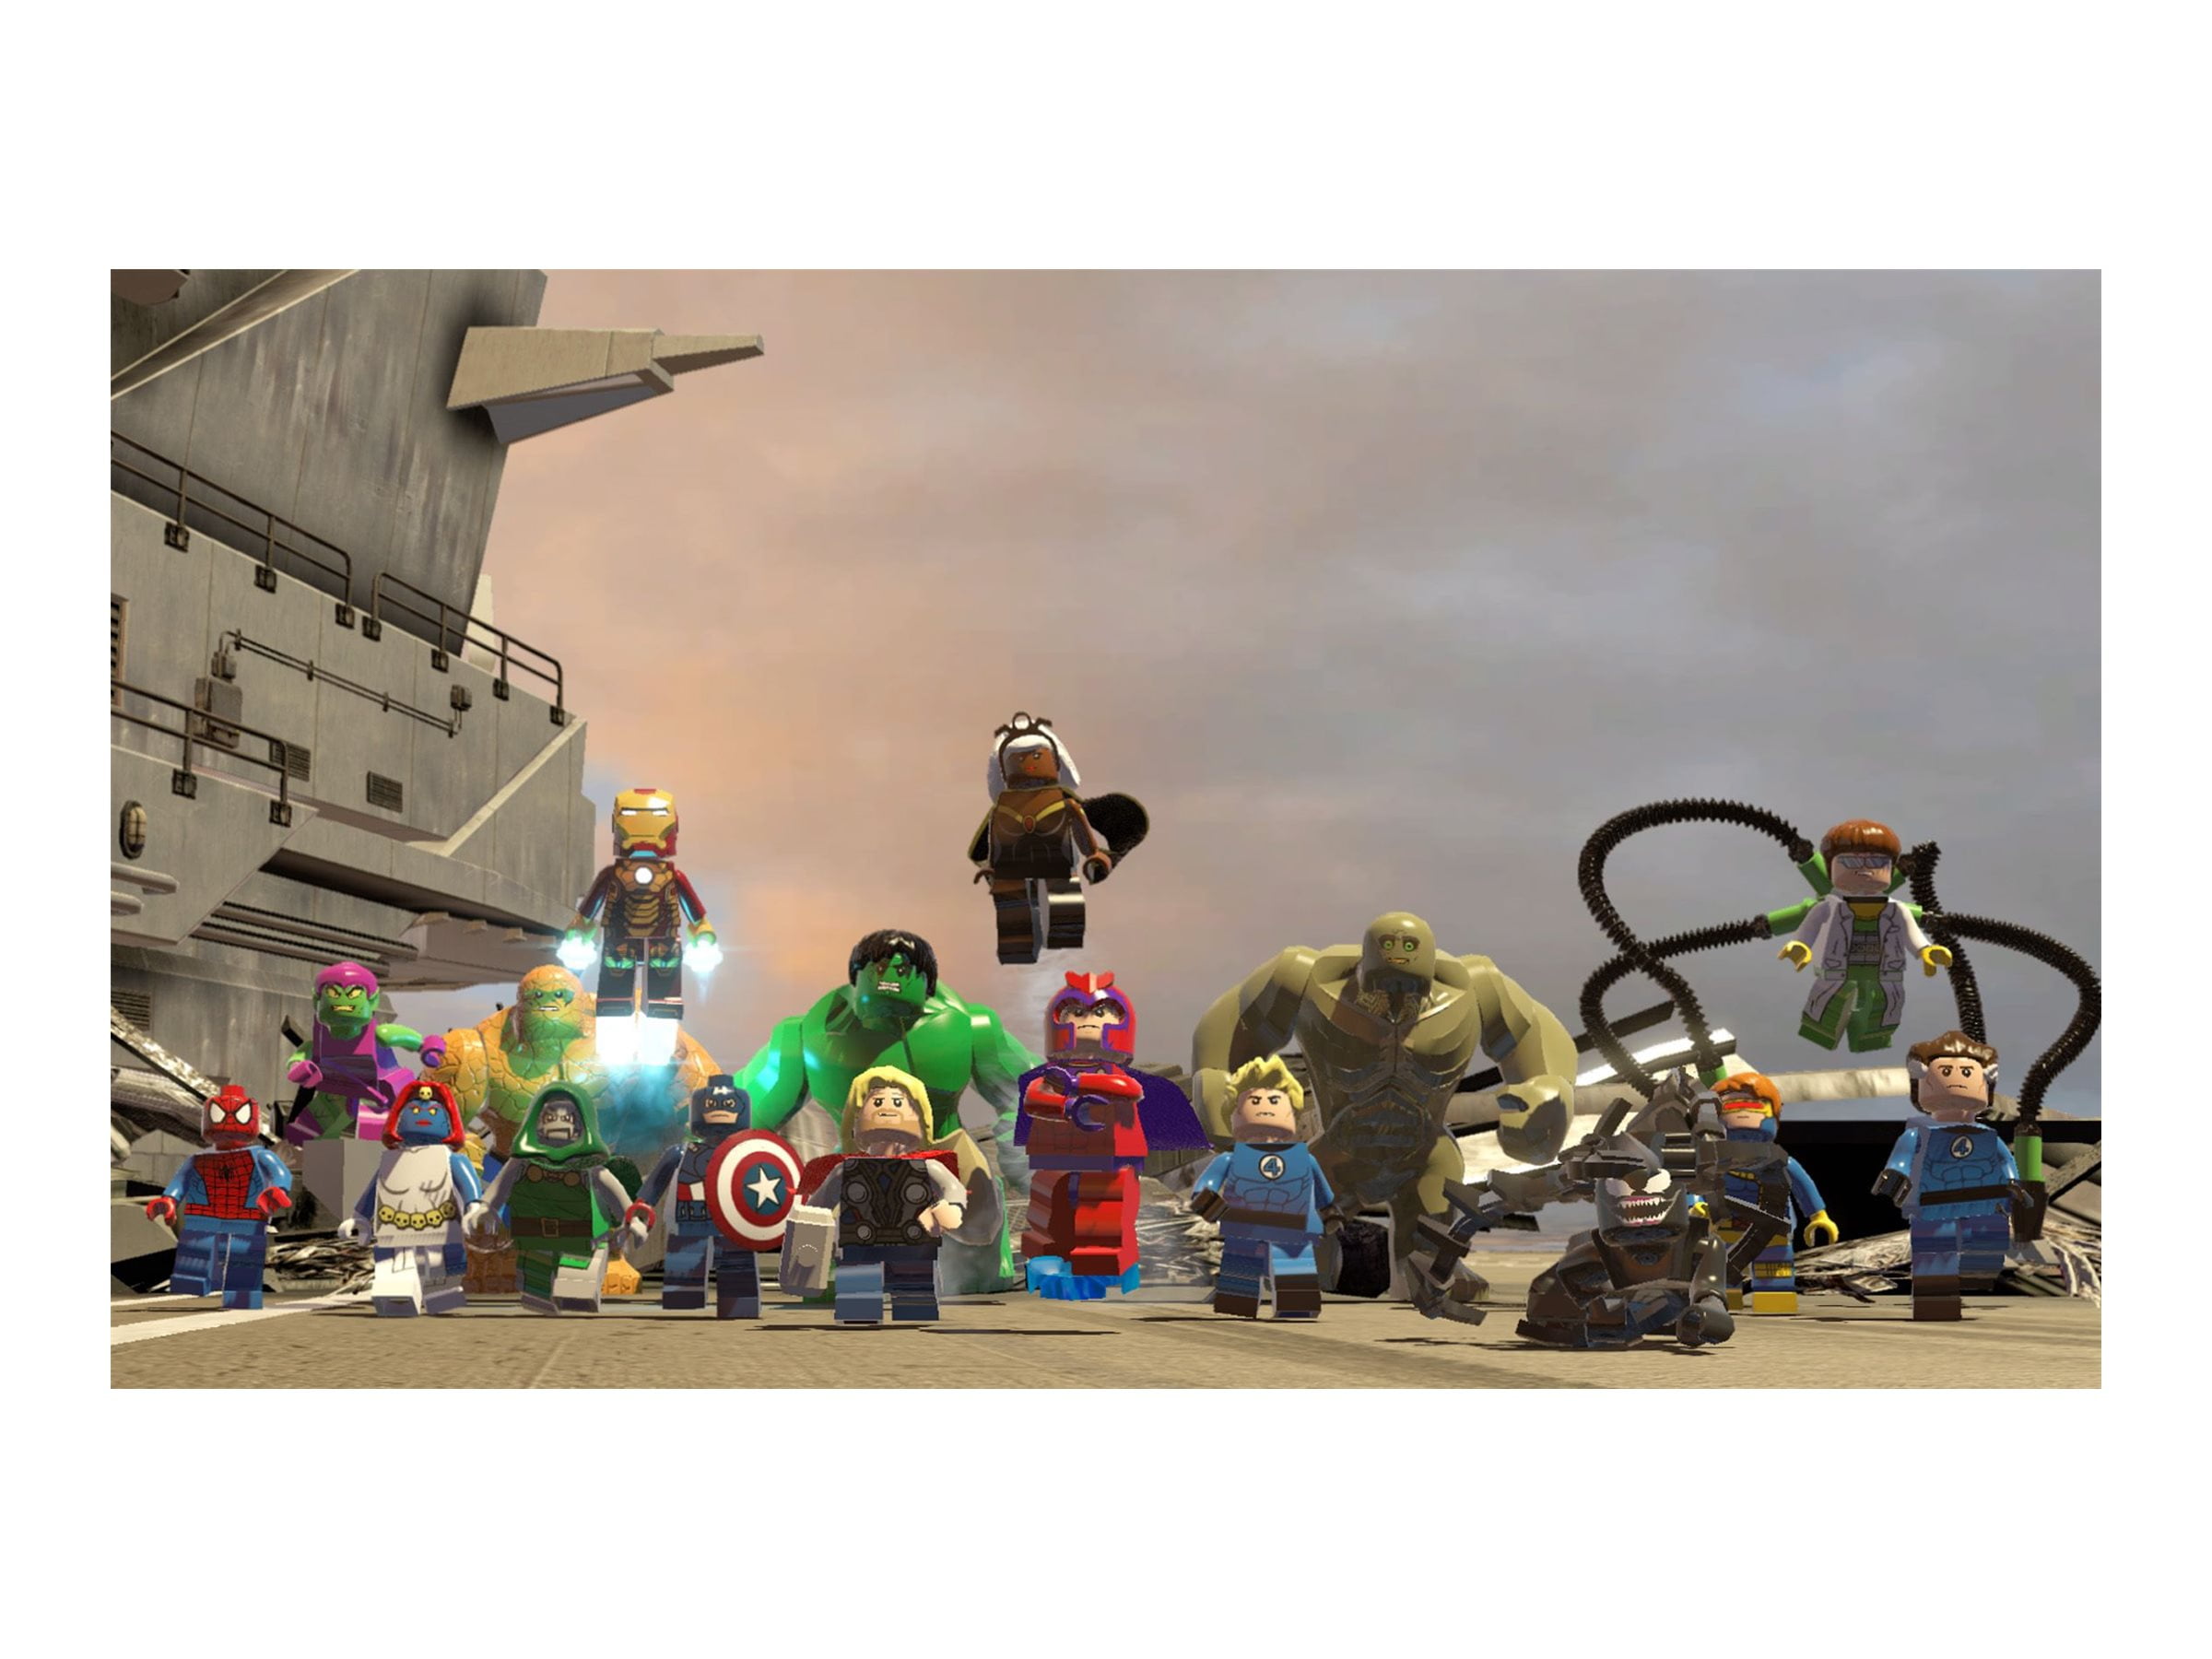 The LEGO Marvel Collection - PlayStation 4